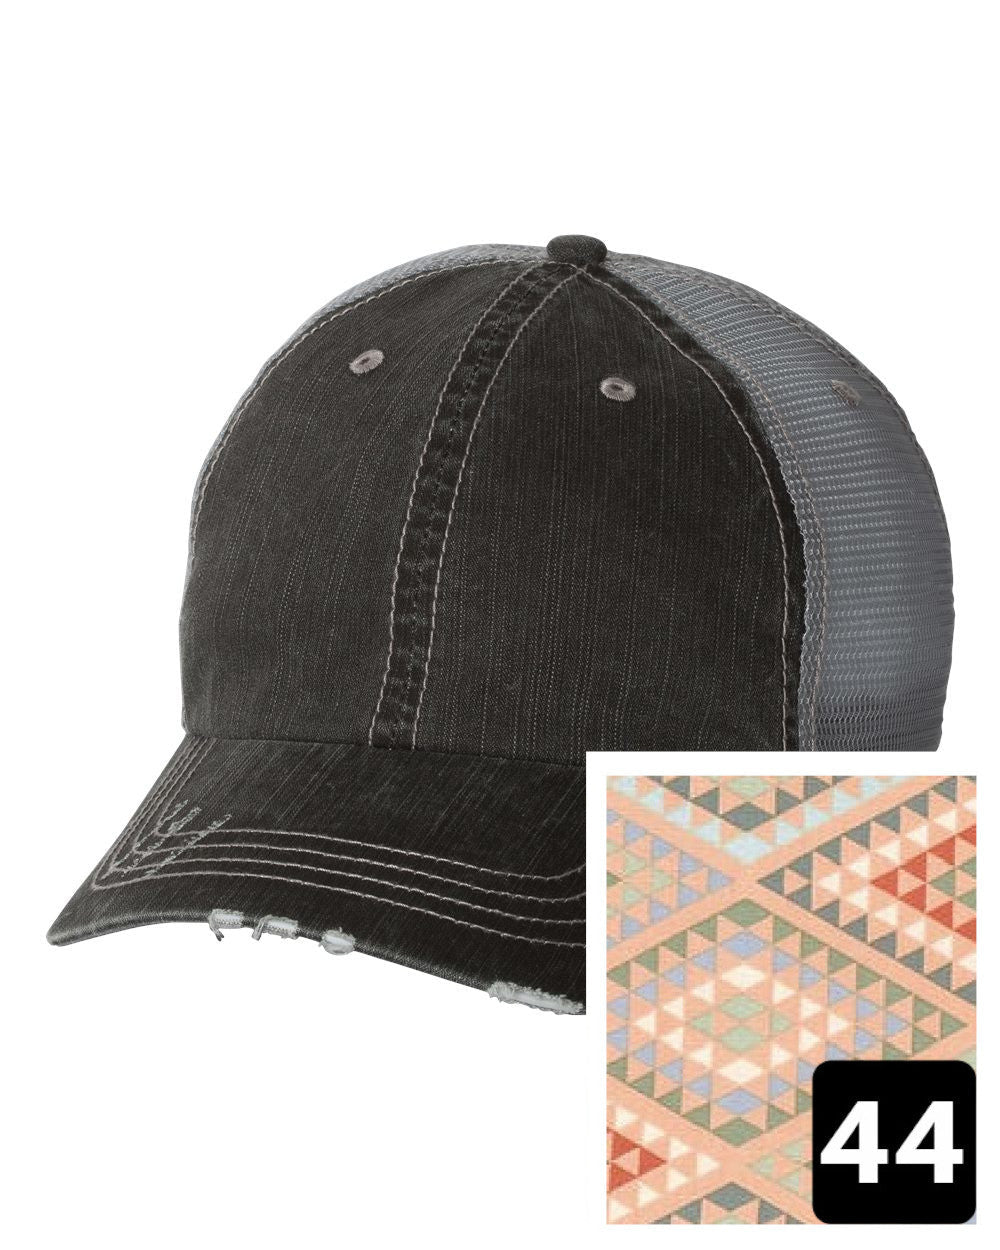 gray distressed trucker hat with navy coral and white chevron fabric state of Hawaii